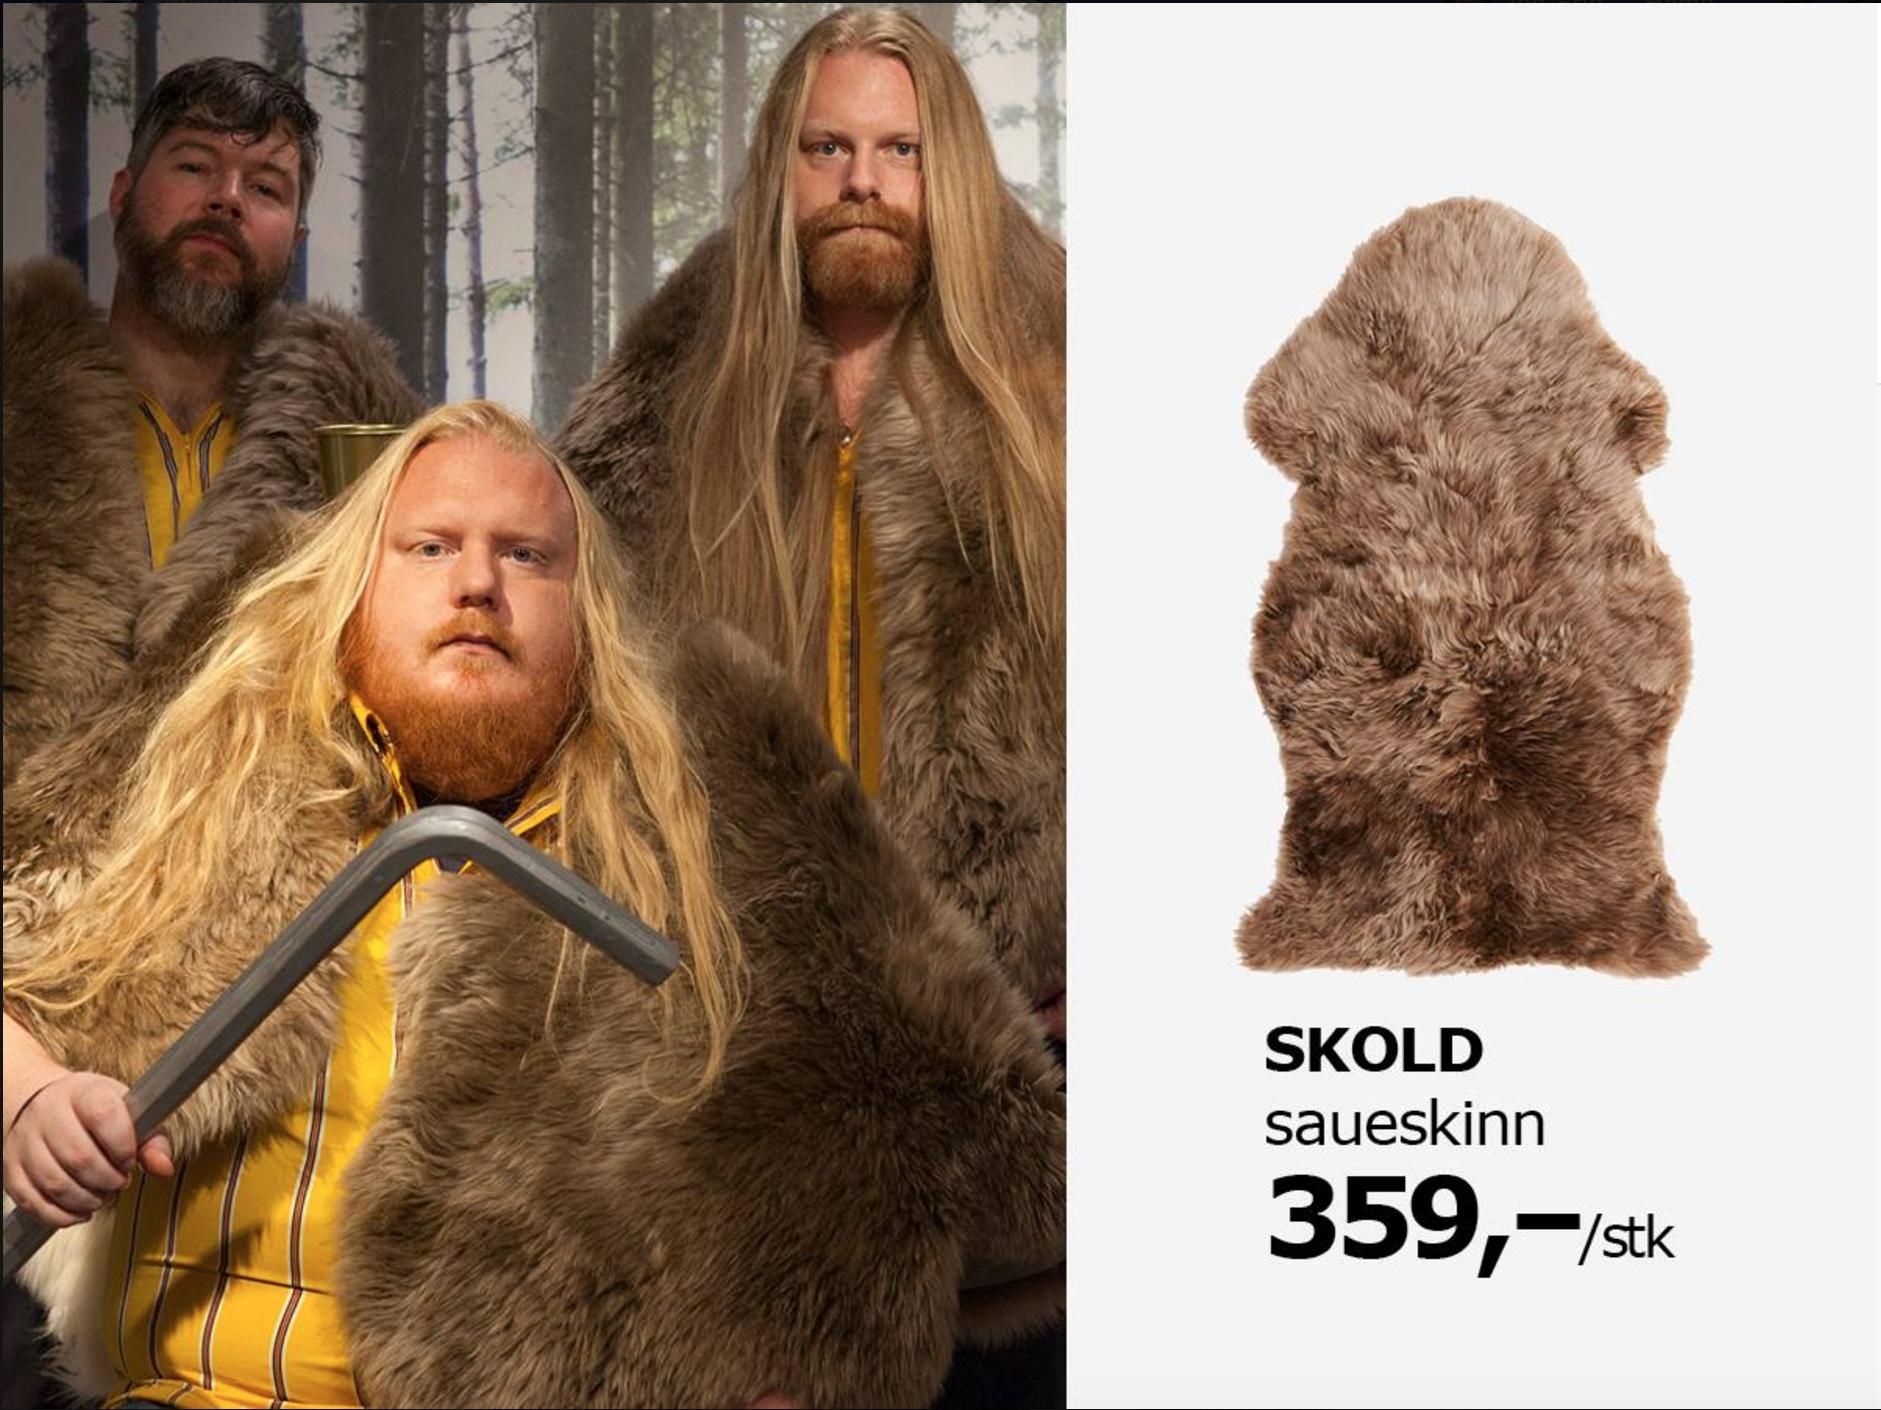 Employees of IKEA Furuset in Oslo, Norway posted this after they found out furs from IKEA were used in costumes in Game Of Thrones